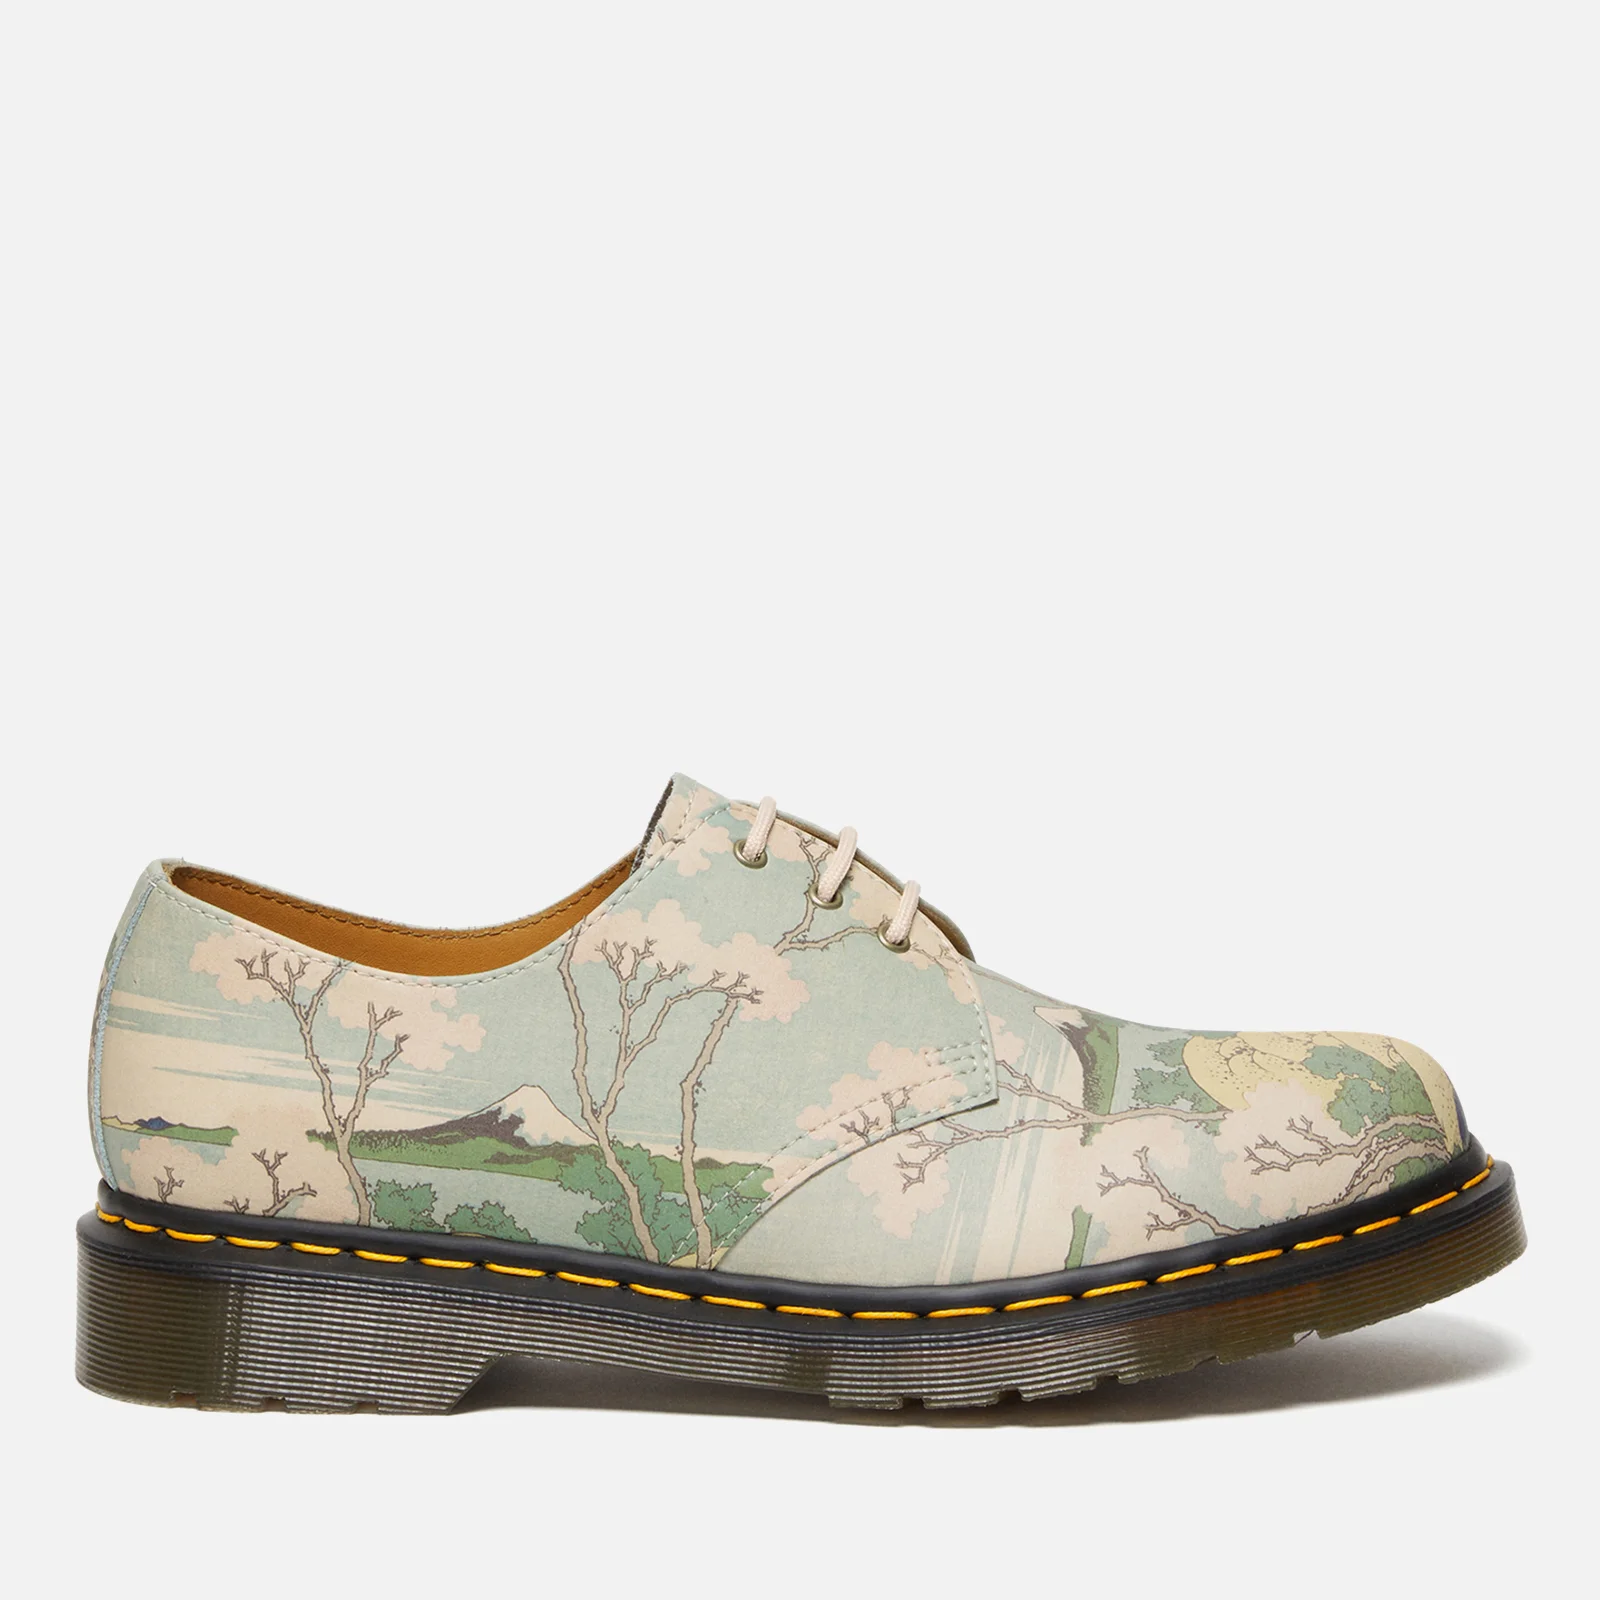 Dr. Martens 1461 The Met Masterpiece 3-Eye Shoes Image 1